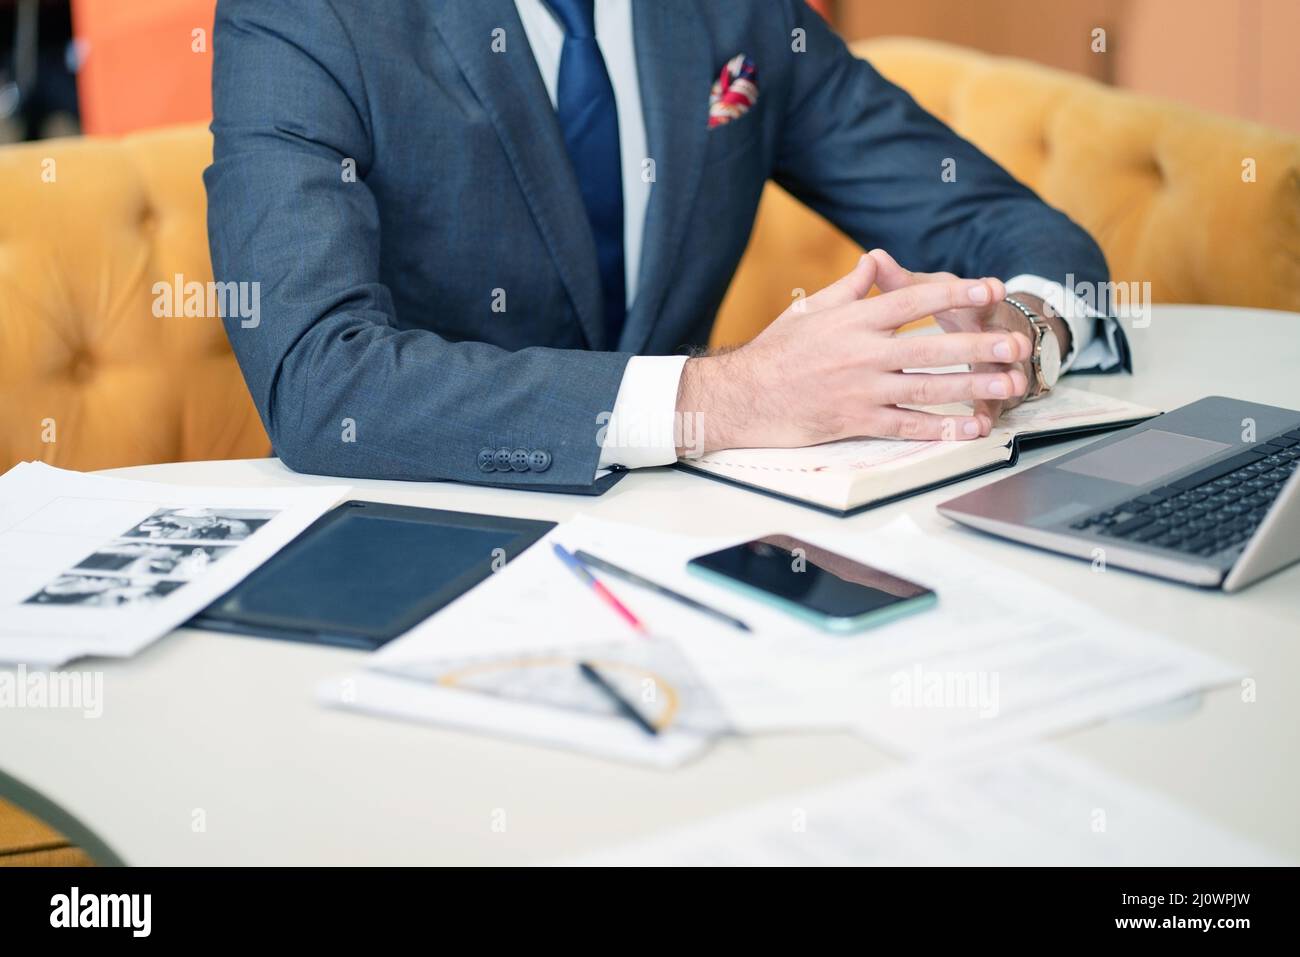 Torso of a Business Man in a Formal Suit, Sitting at his Desk, Hands are on the Diary. On the Table there is a Laptop, Work Pape Stock Photo